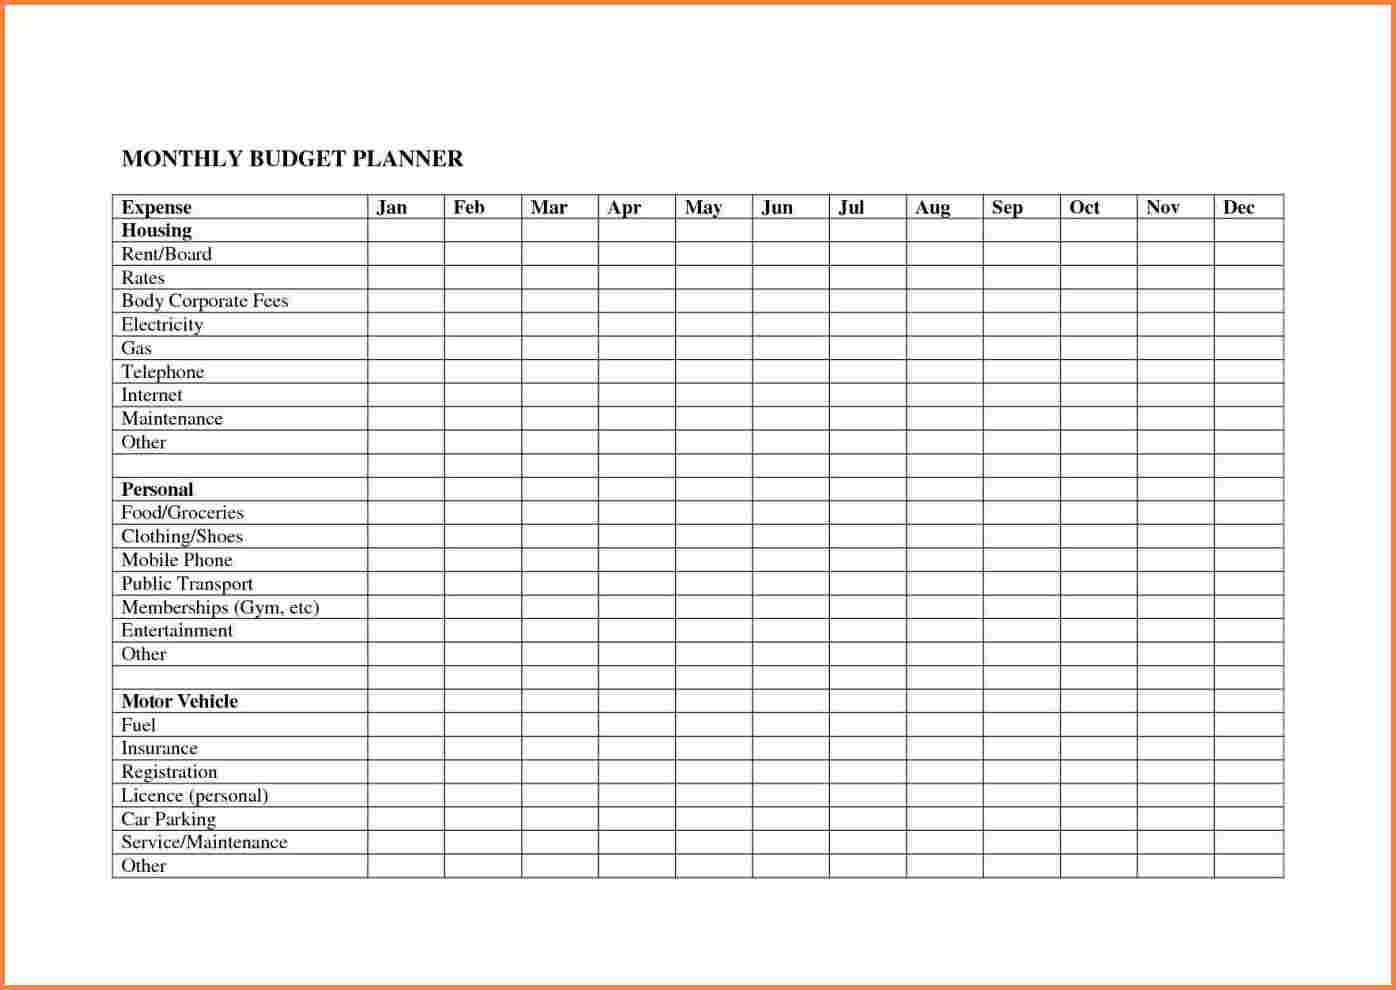 010 Monthly Budget Planner Template Ideas Spreadsheet Examples - Free Printable Worksheets Uk